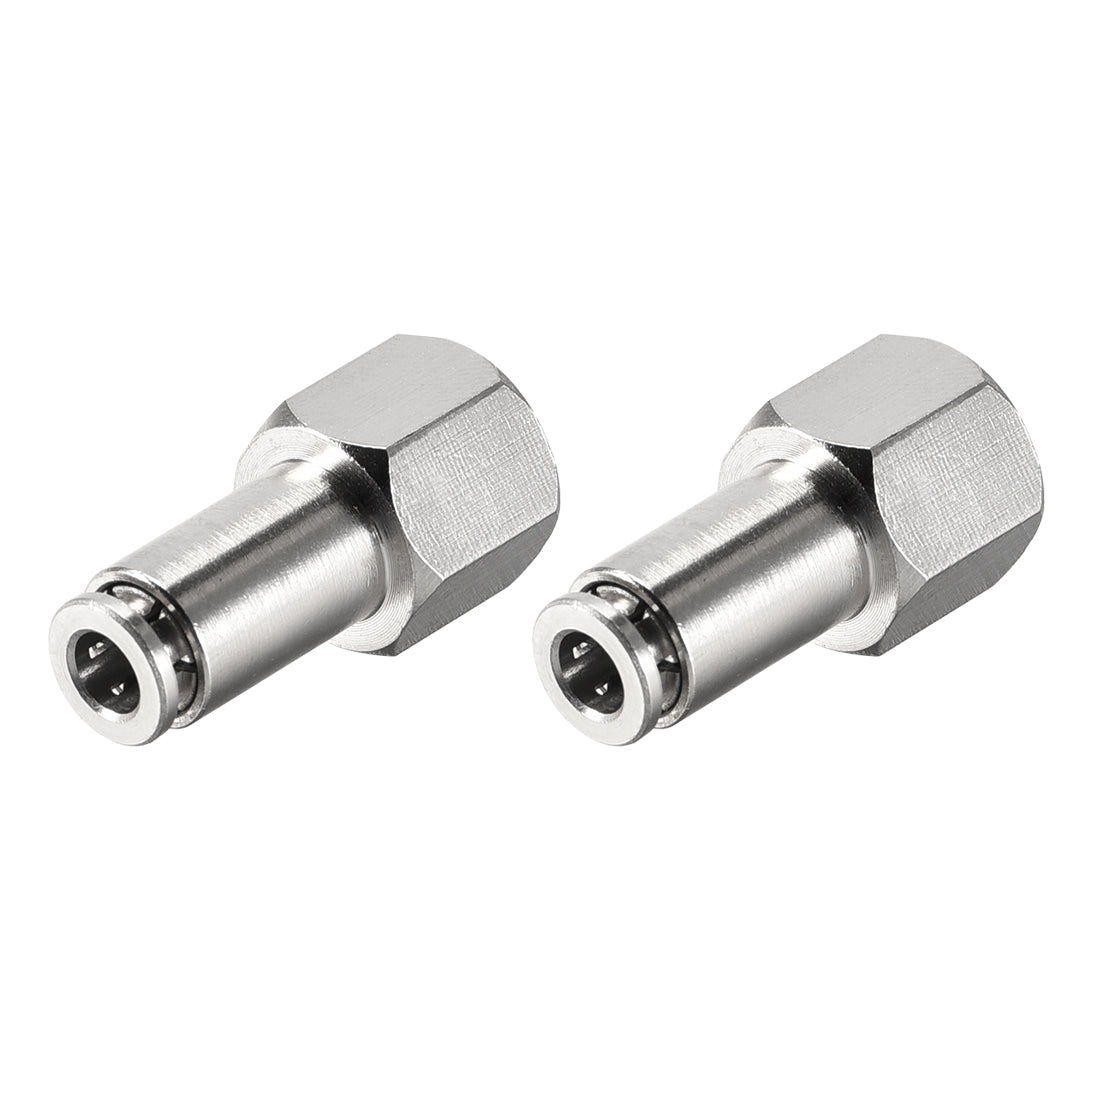 uxcell Uxcell Push to Connect Tube Fittings 4mm Tube OD x 1/8 PT Female Straight Pneumatic Connector Pipe Fitting Silver Tone 2Pcs